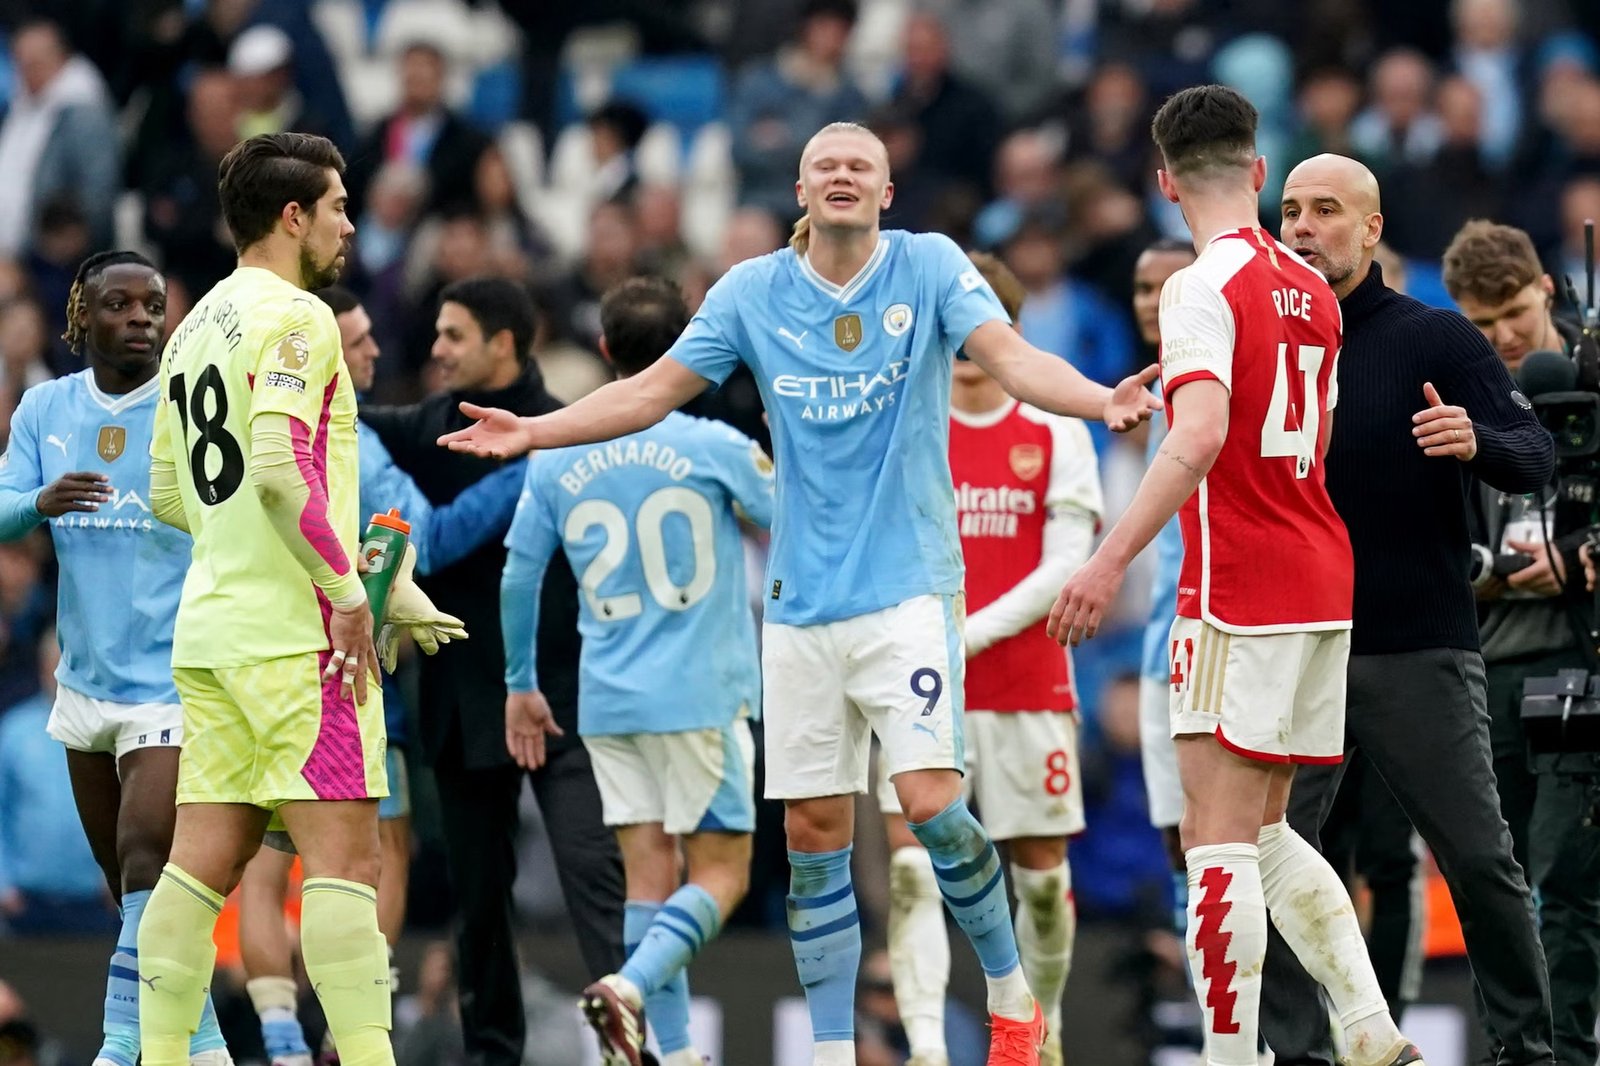 Man City, Arsenal Draw Gives Liverpool Edge in Premier League Title Race